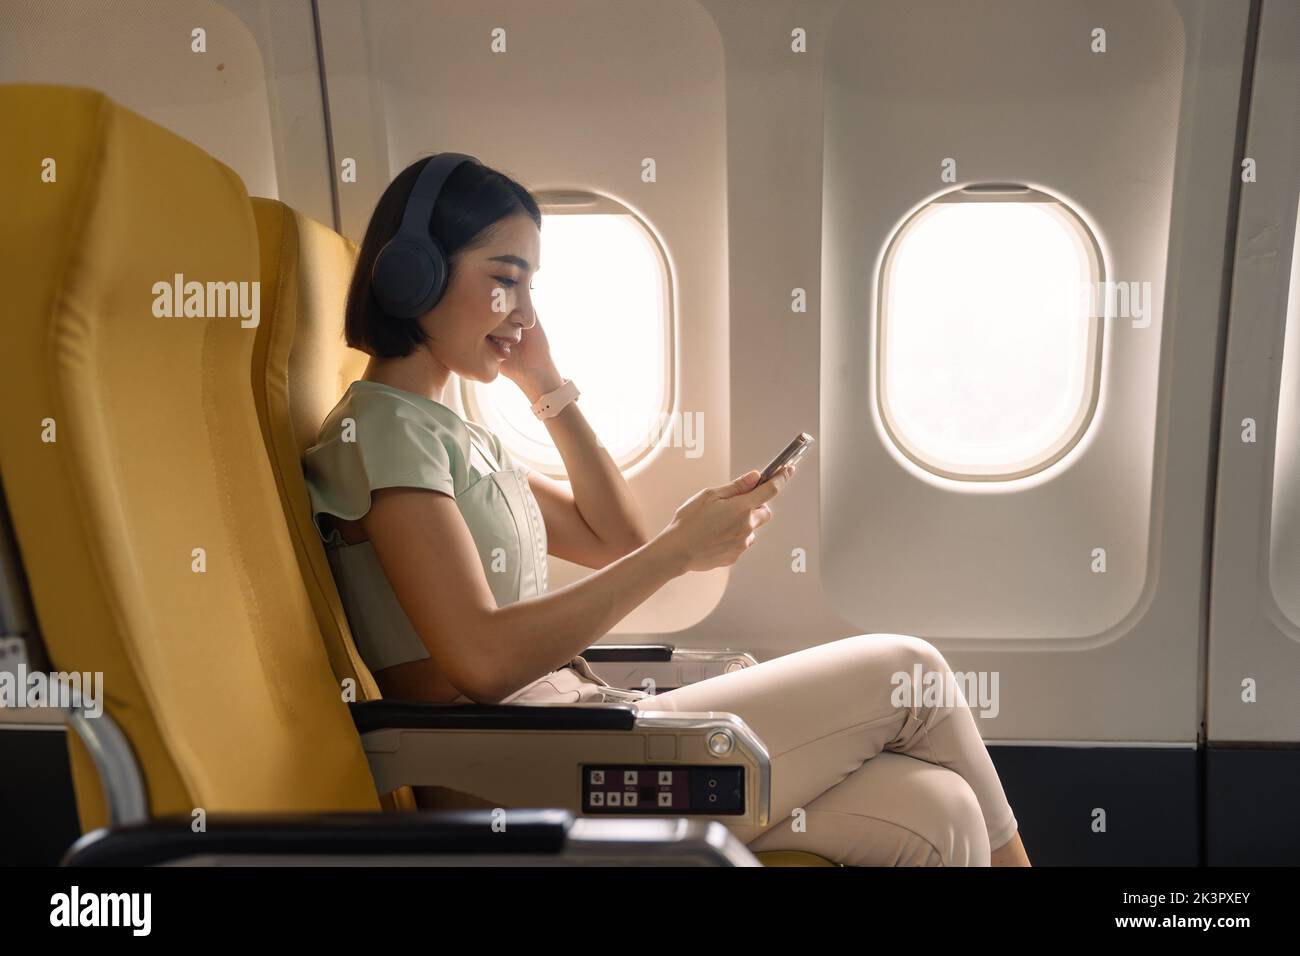 Young woman with mobile phone and headphones listening to music in airplane during flight Stock Photo